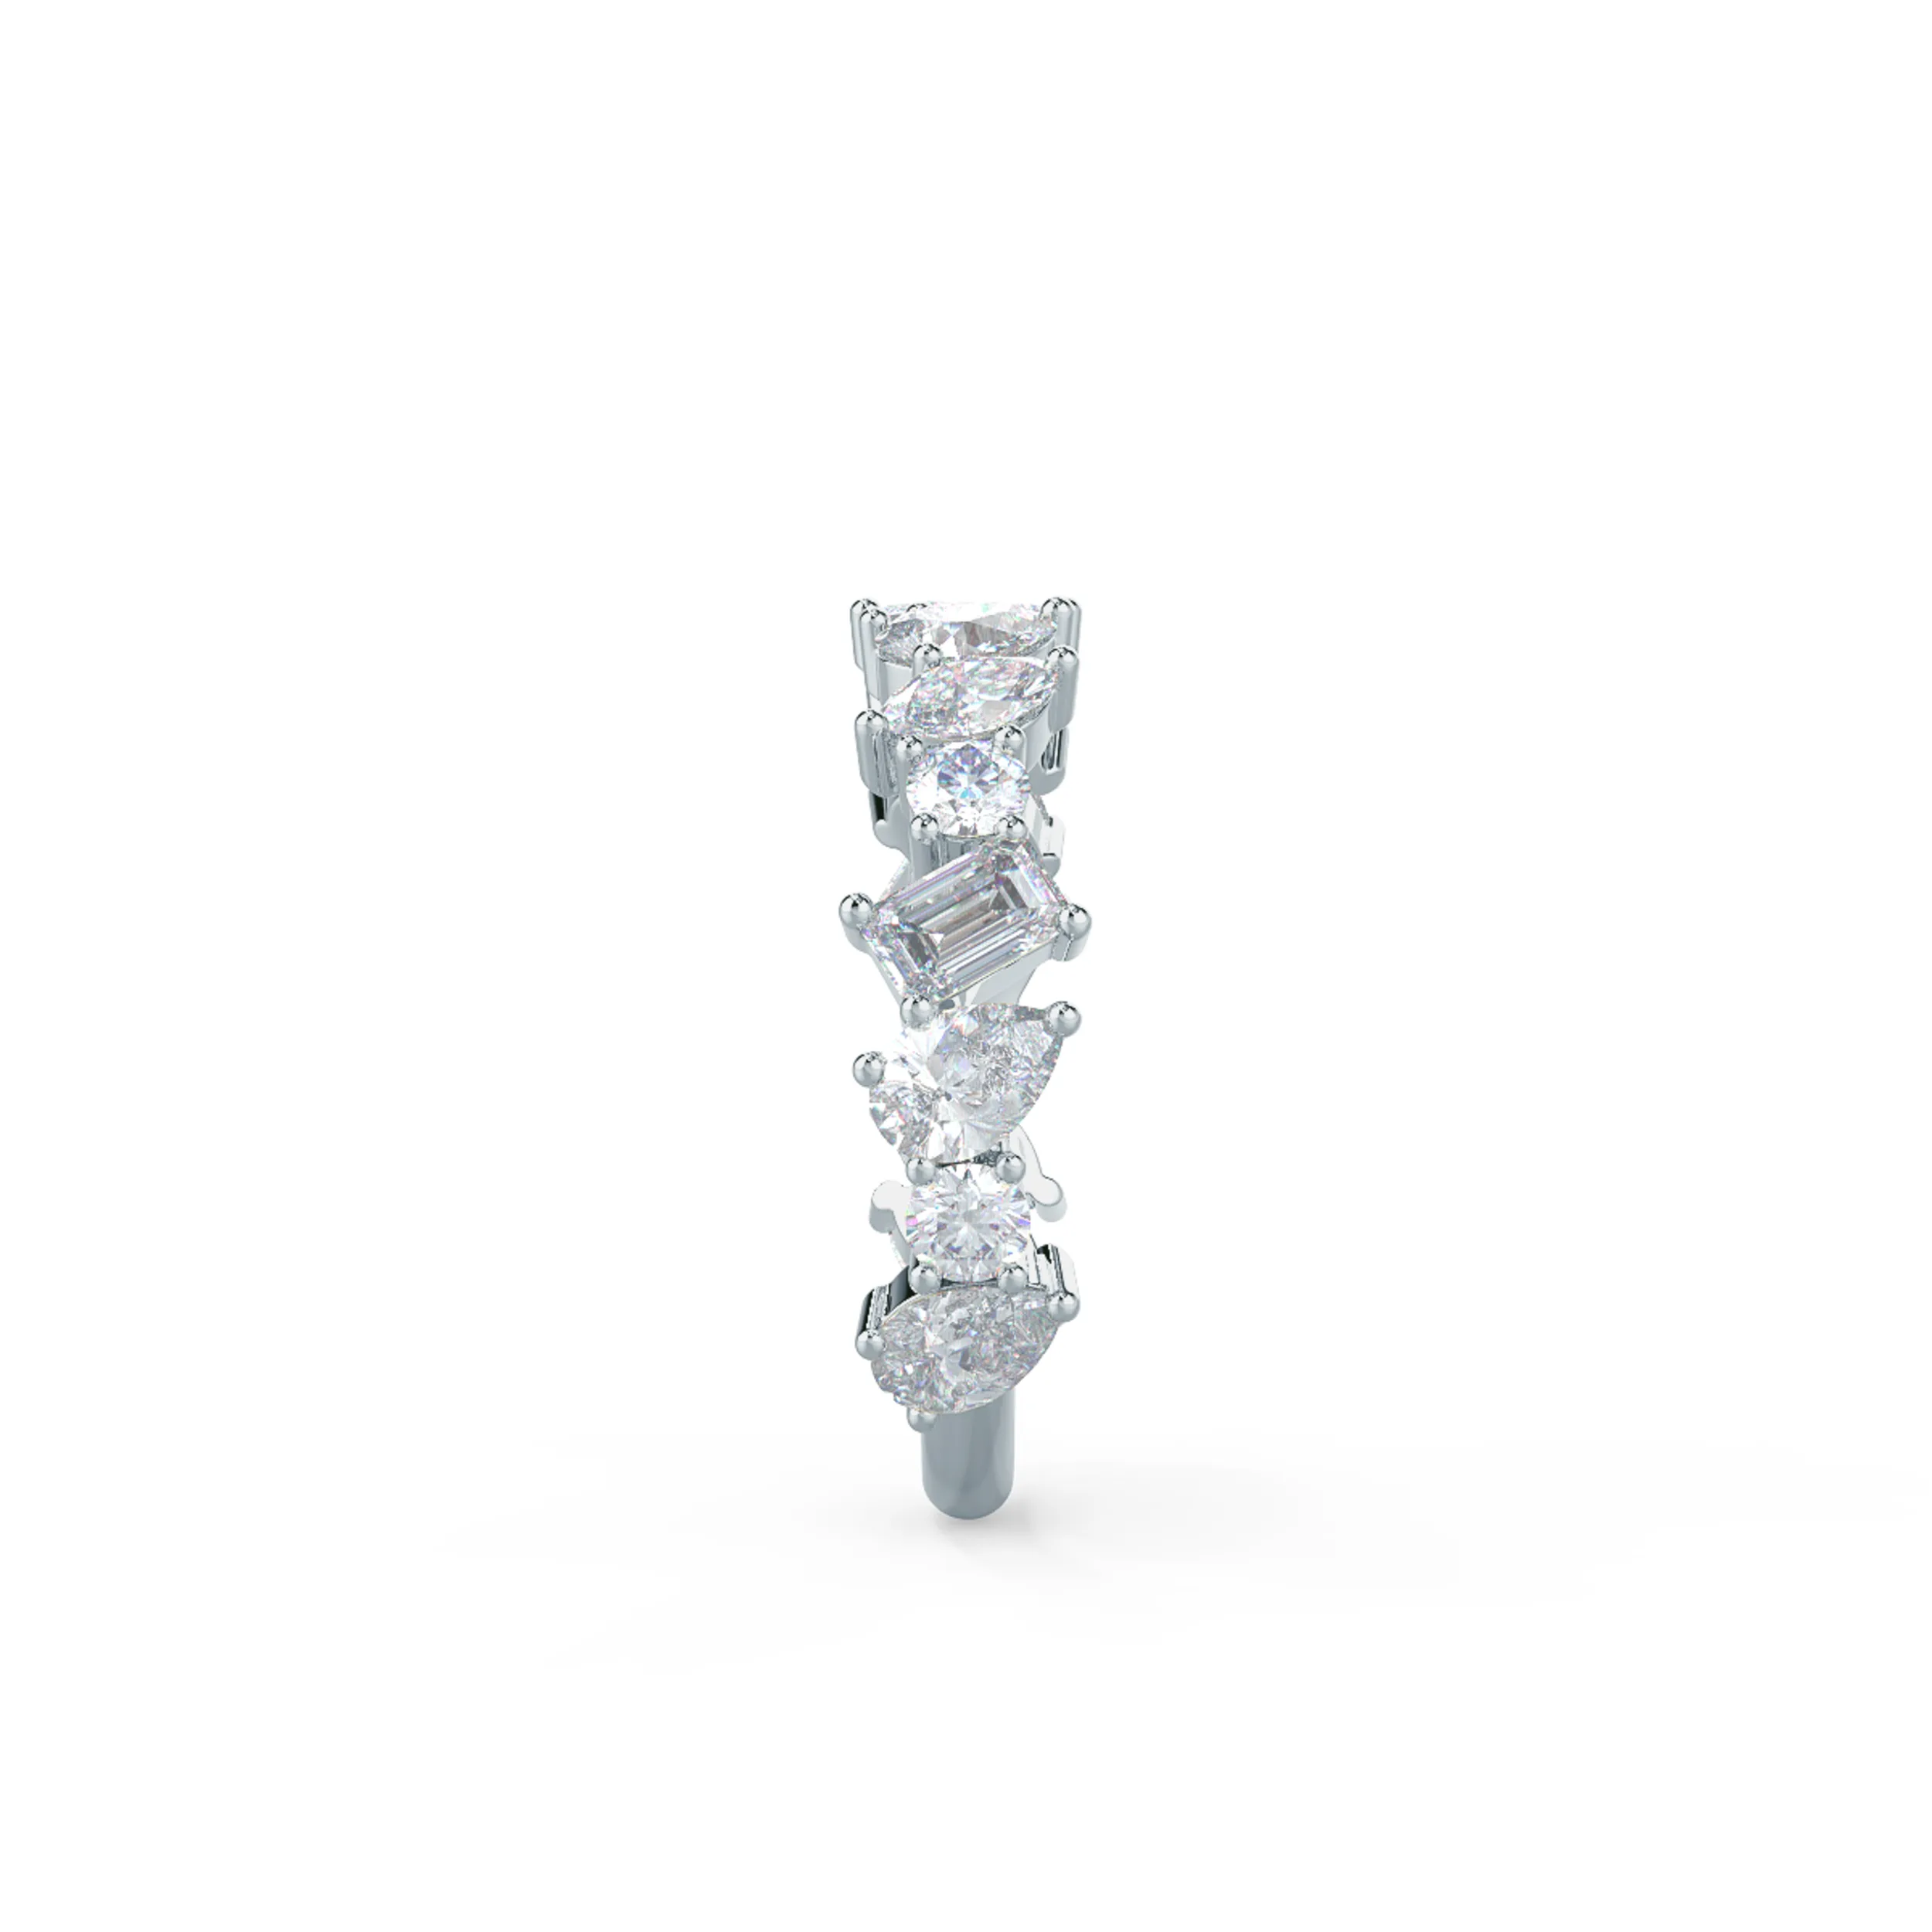 18k White Gold Fiona Three Quarter Band featuring Hand Selected 2.0 ctw Lab Diamonds (Side View)